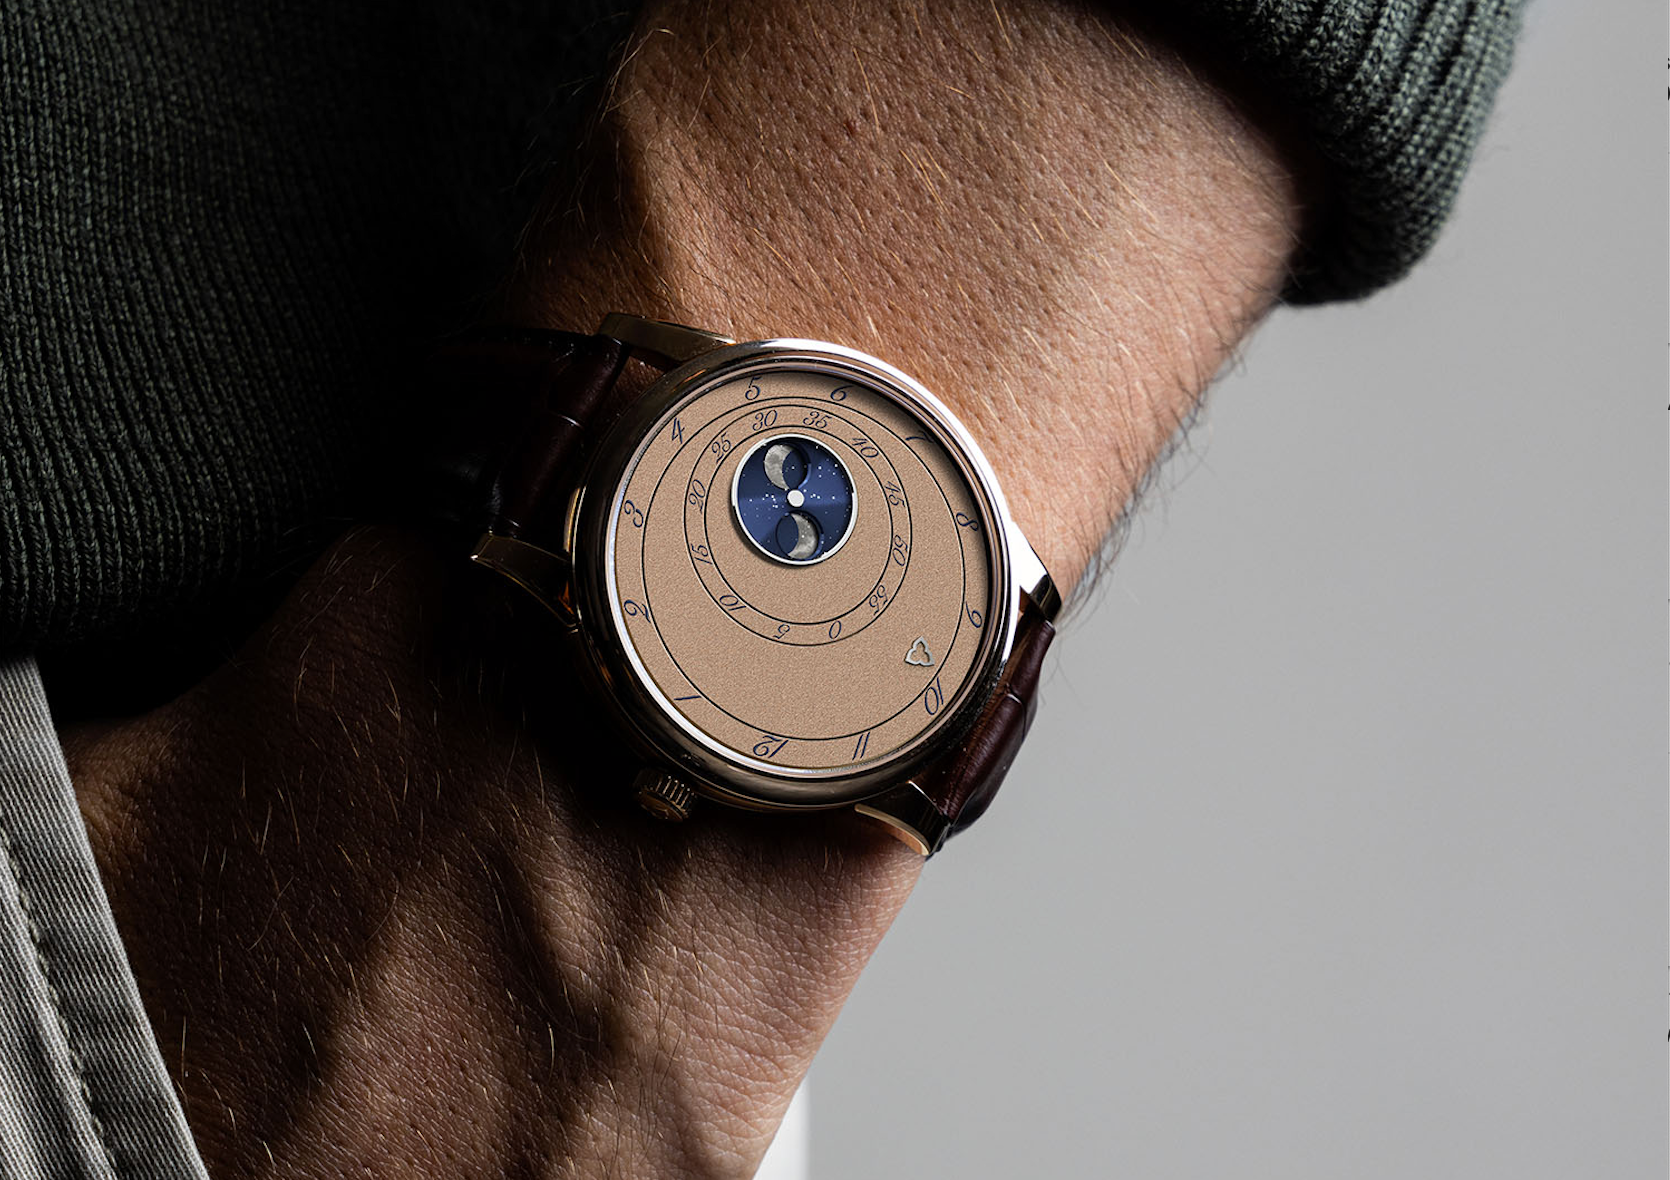 The Trilobe Les Matinaux L’Heure Exquise: Elegance & Innovation through a Moon Phase Display